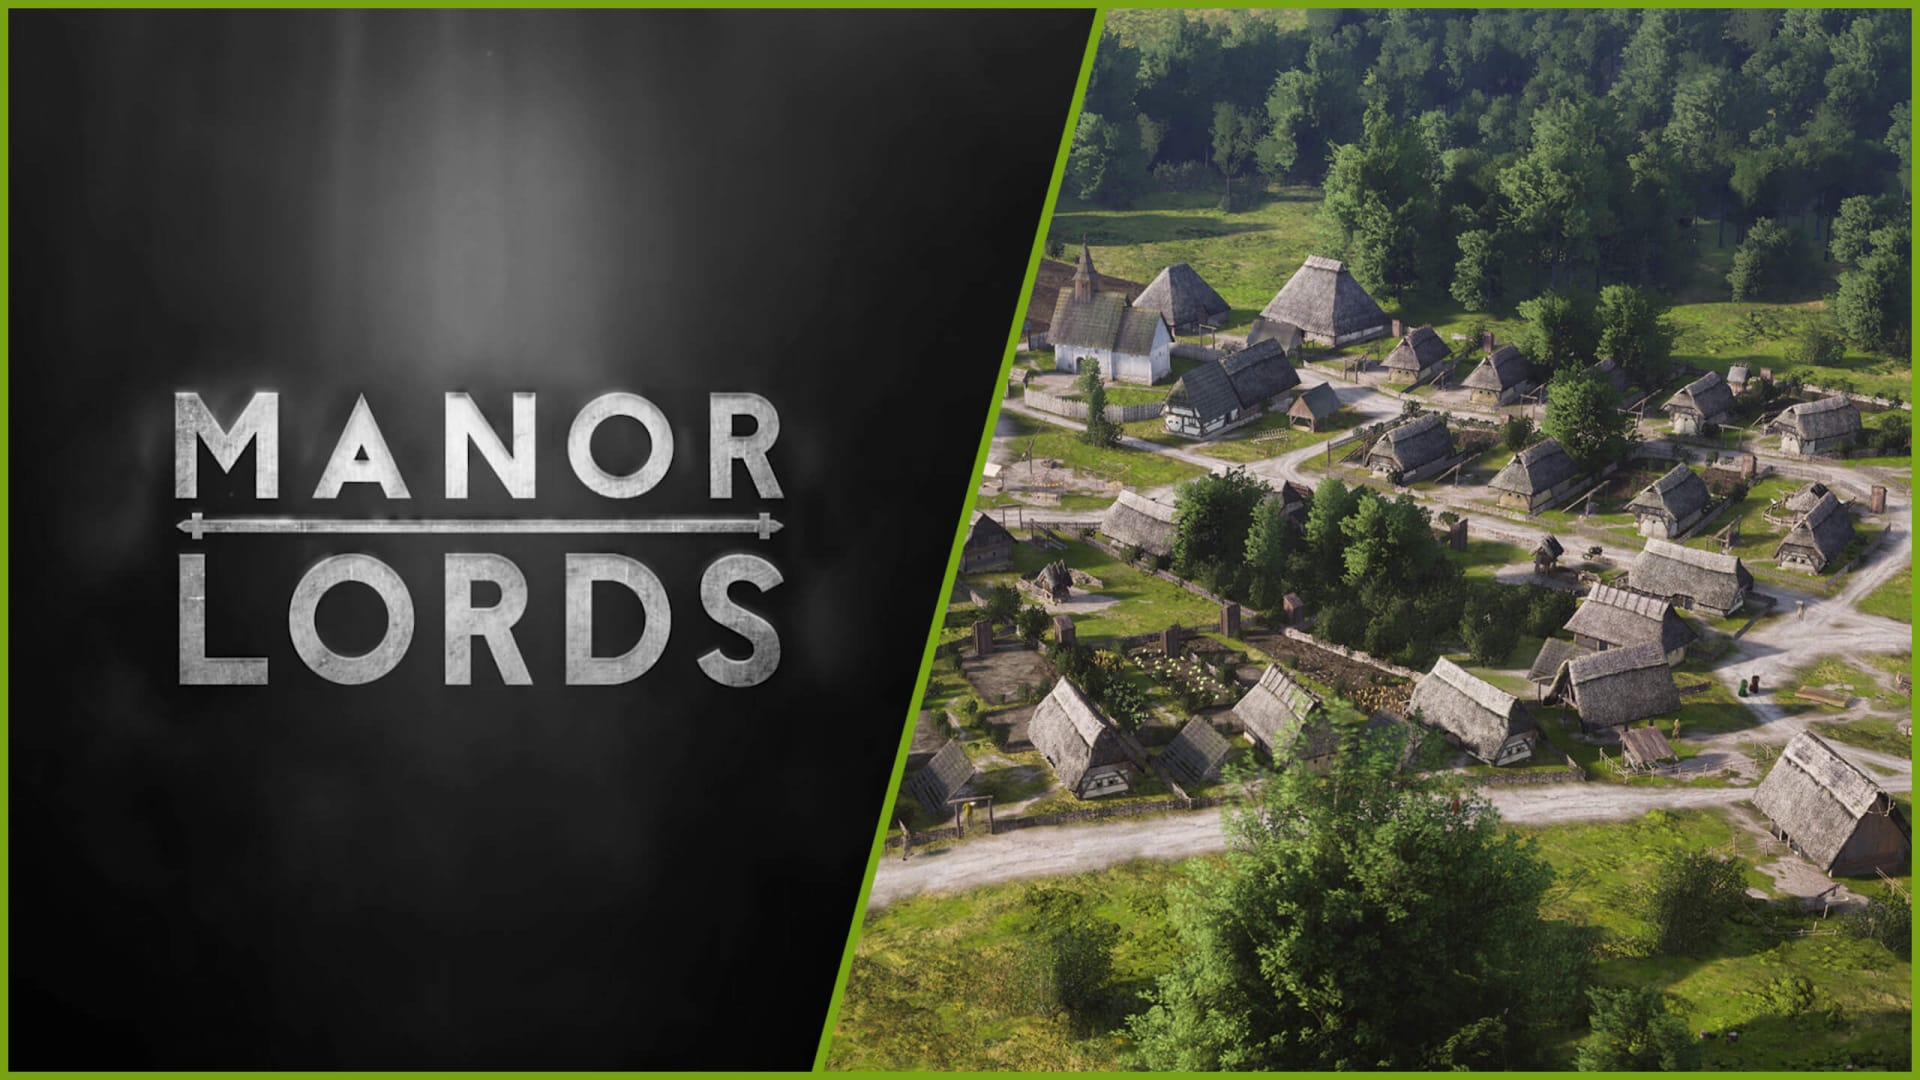 The Manor Lords logo next to a shot of a village from the game